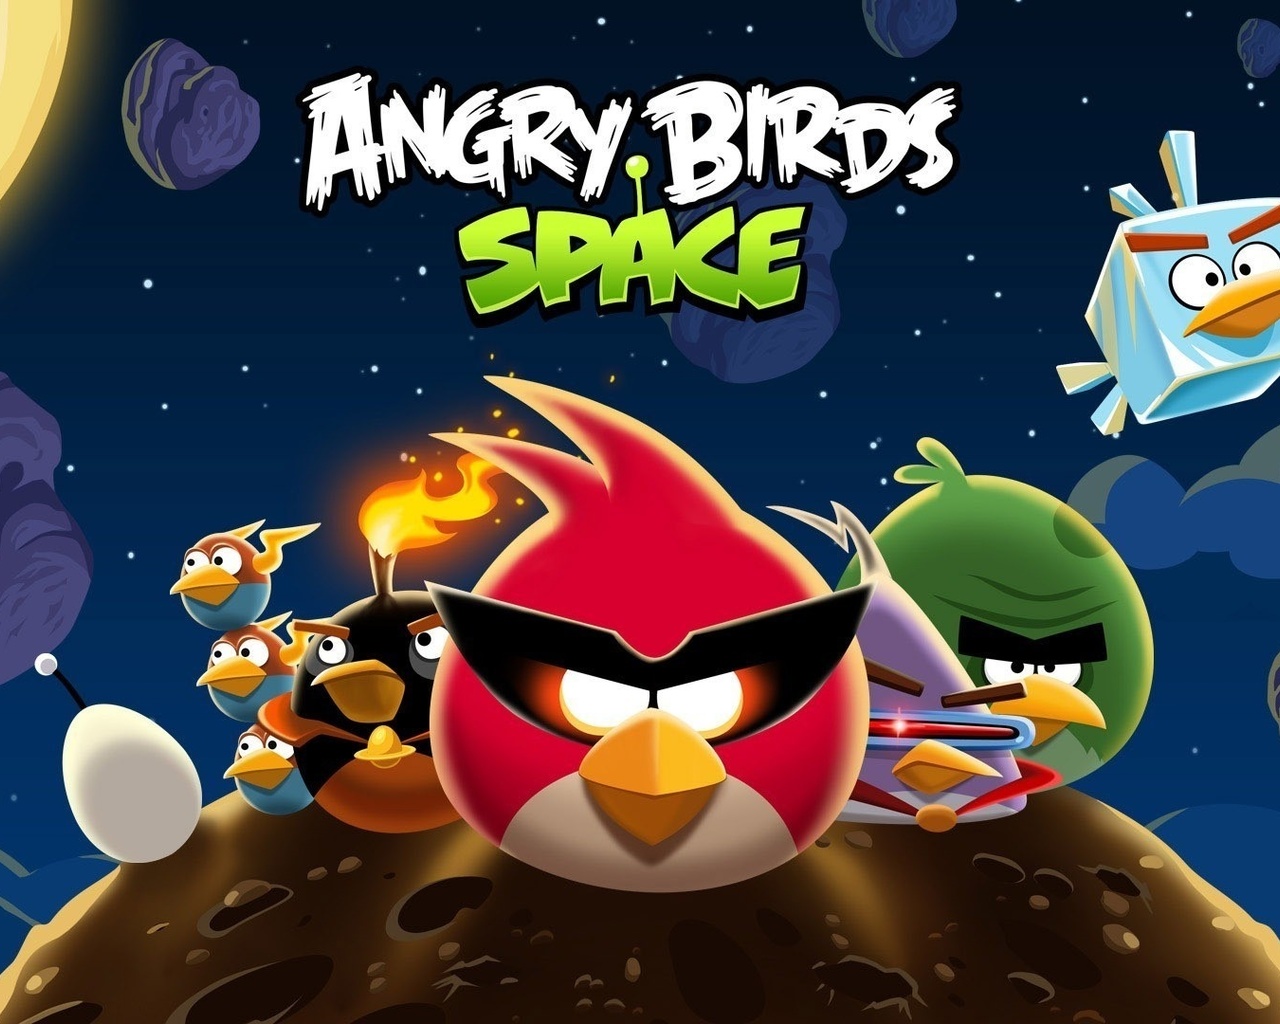  , angry birds space, Angry birds